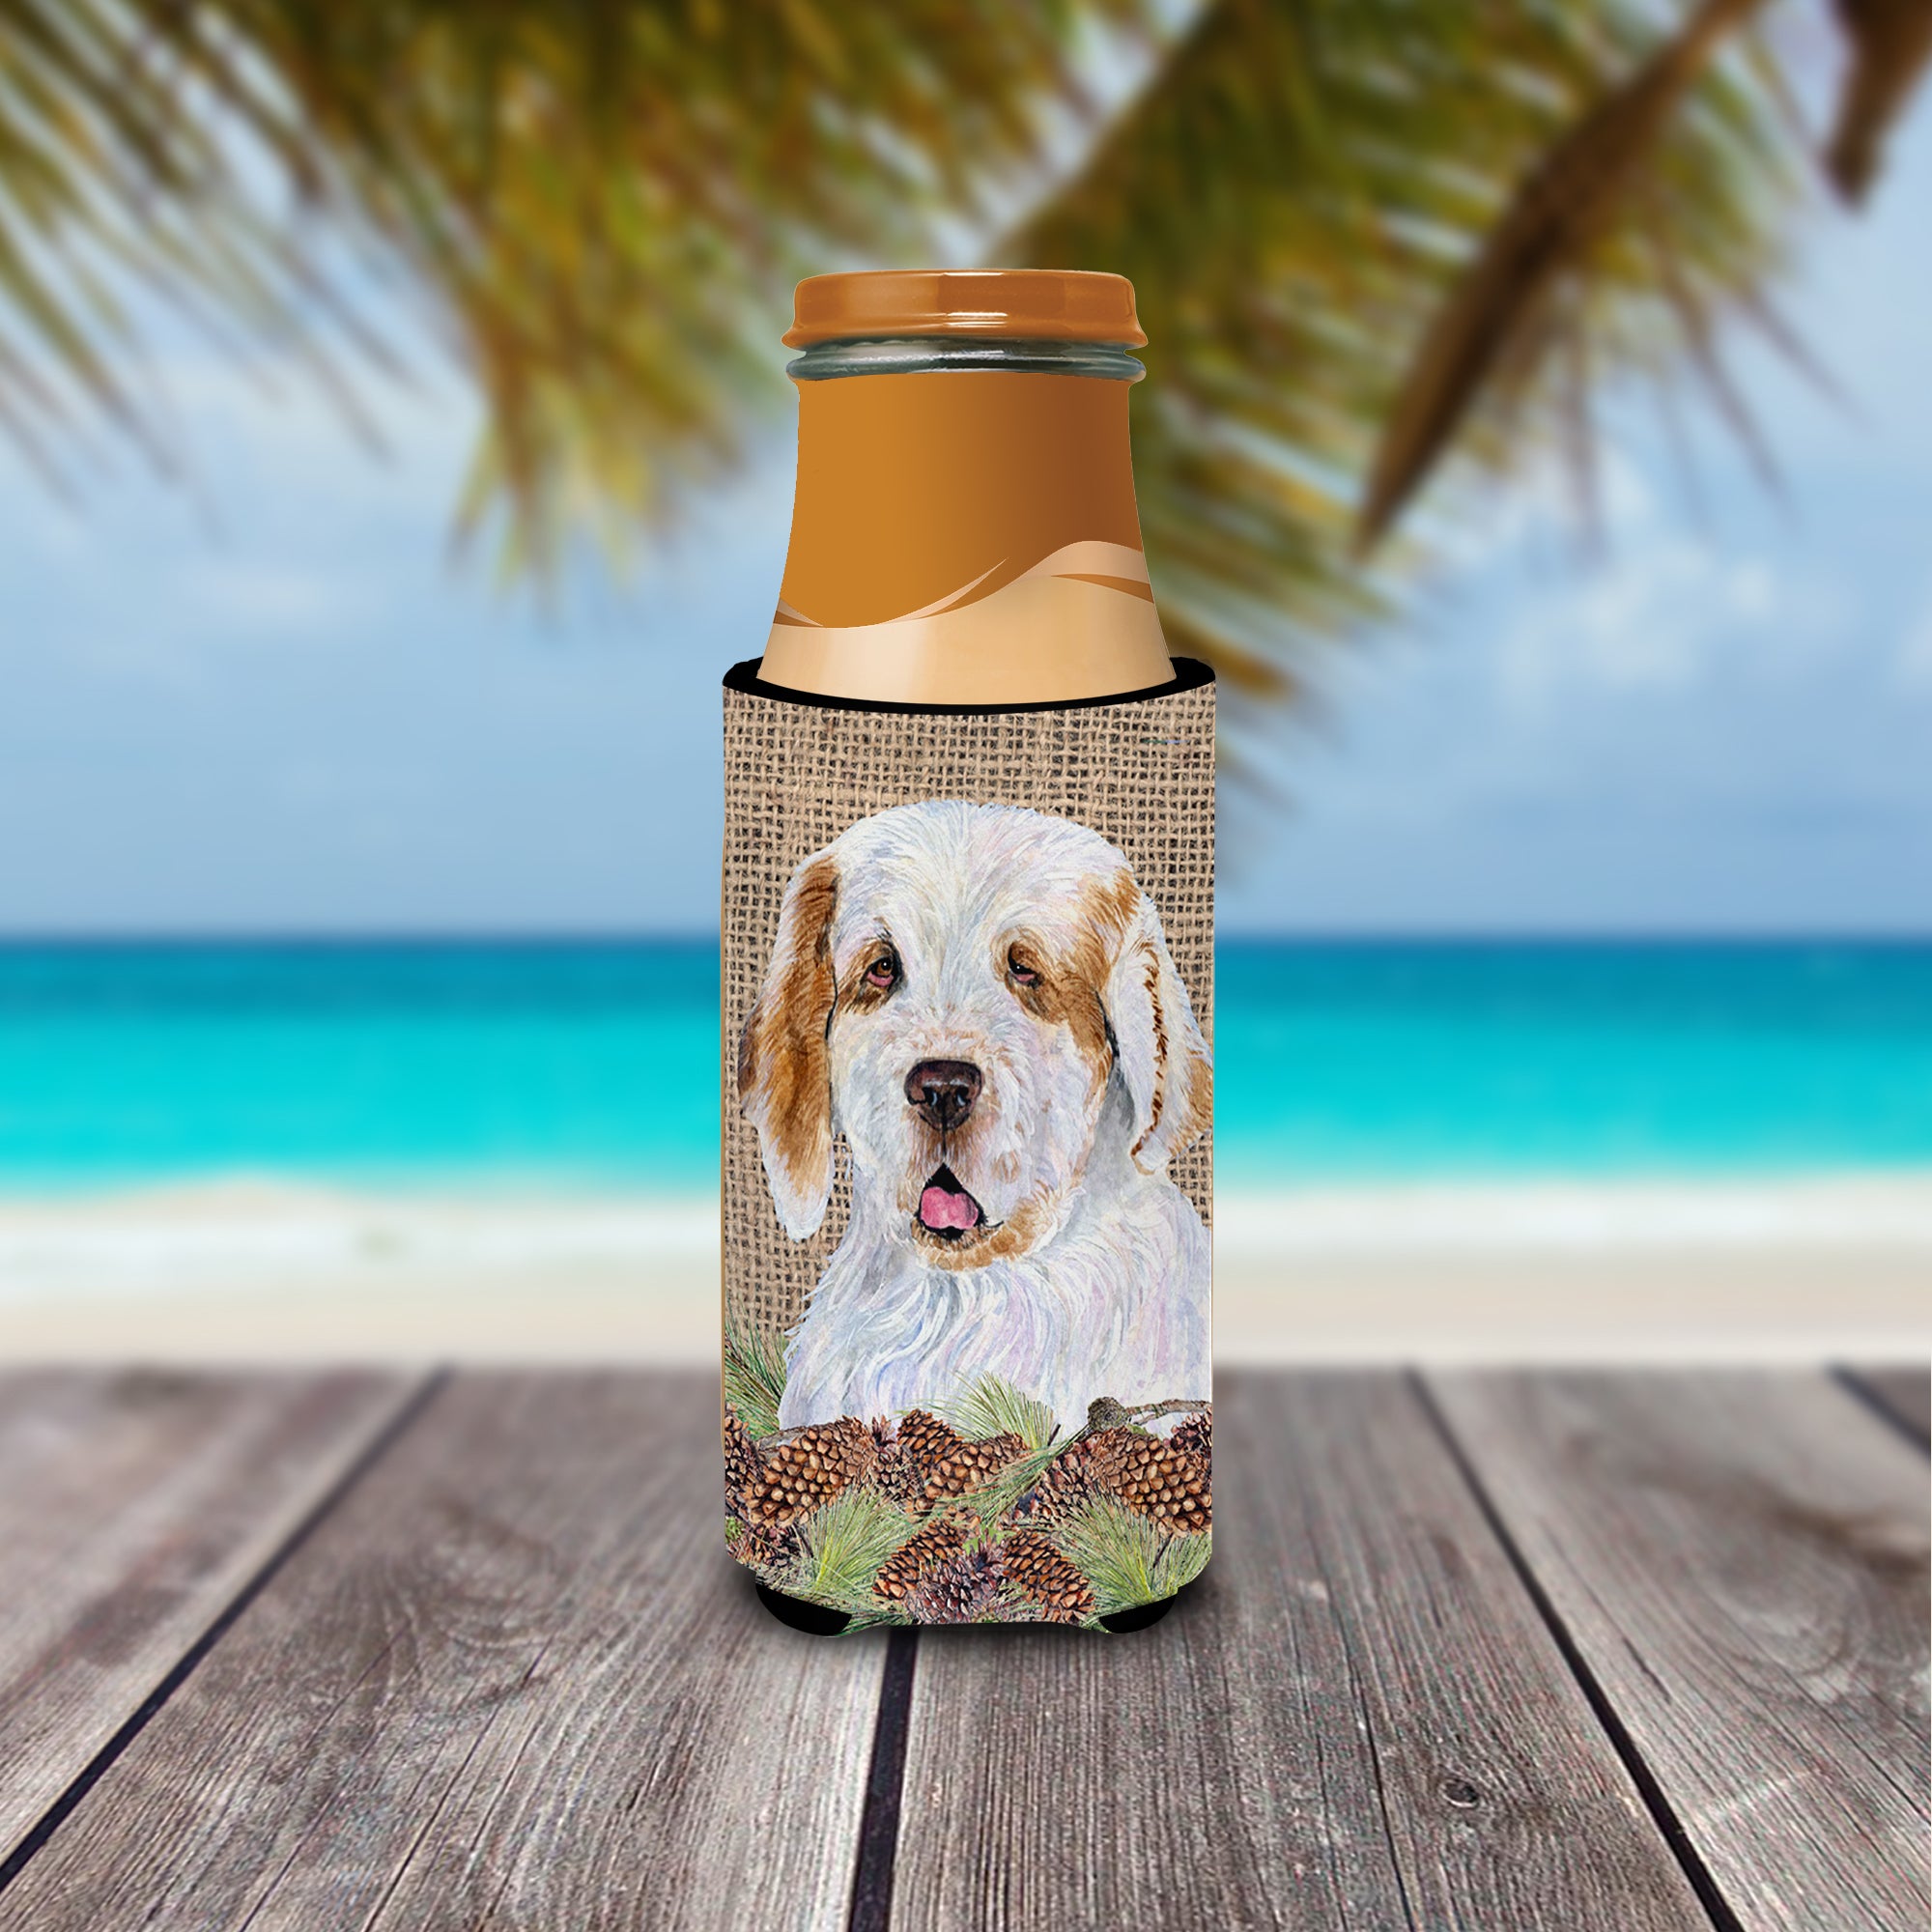 Clumber Spaniel on Faux Burlap with Pine Cones Ultra Beverage Insulators for slim cans SS4089MUK